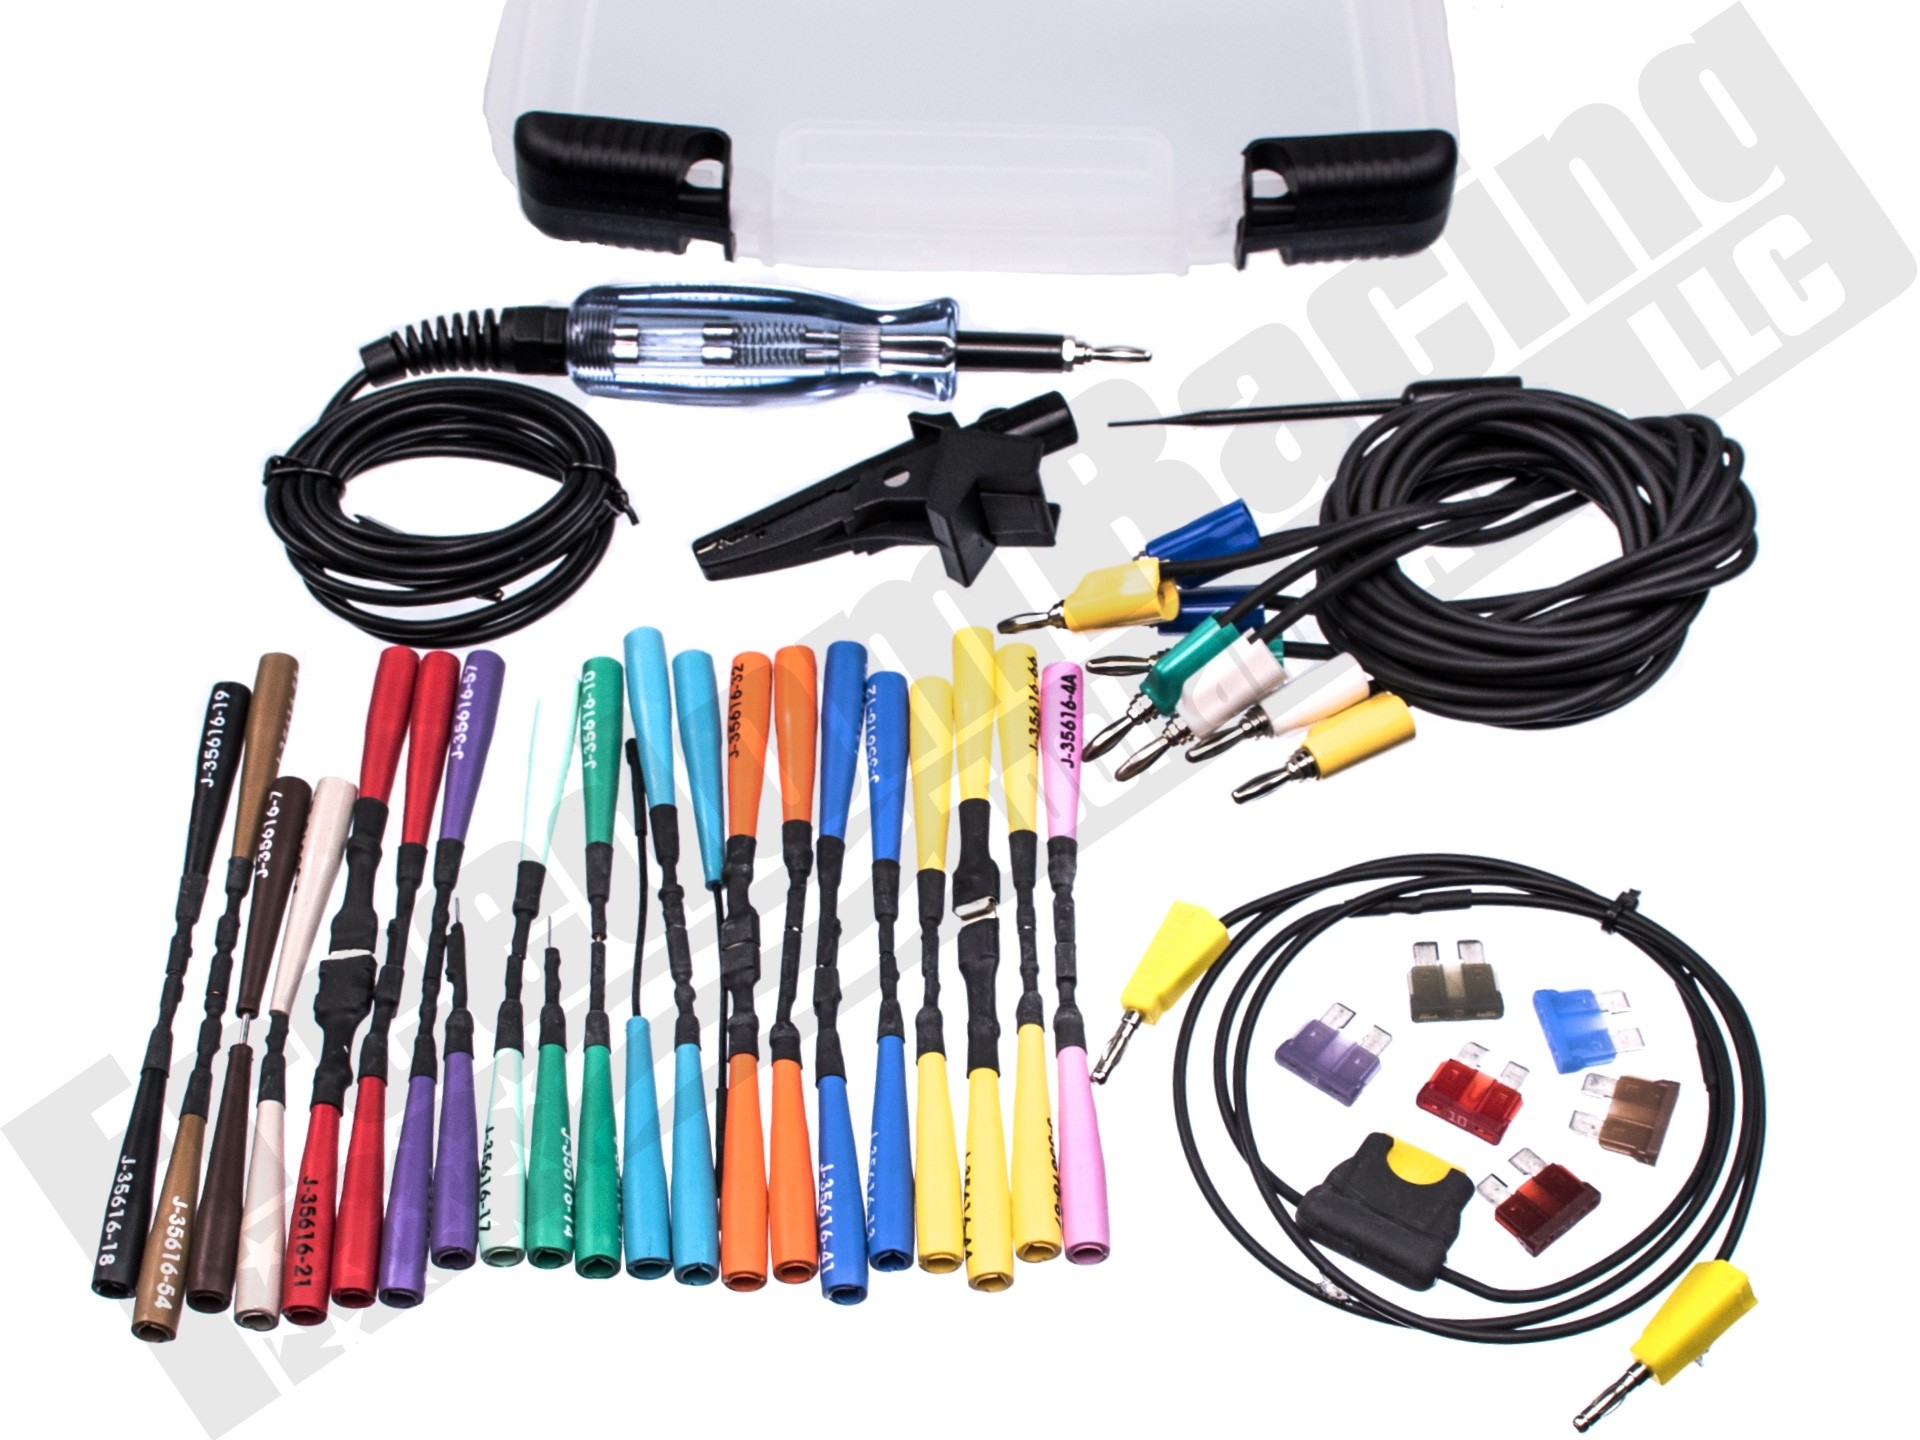 Details about   For GM TP-300-A Terminal Test Probe Wiring Kit Tool EL-35616-300-A J-35616-F kit 